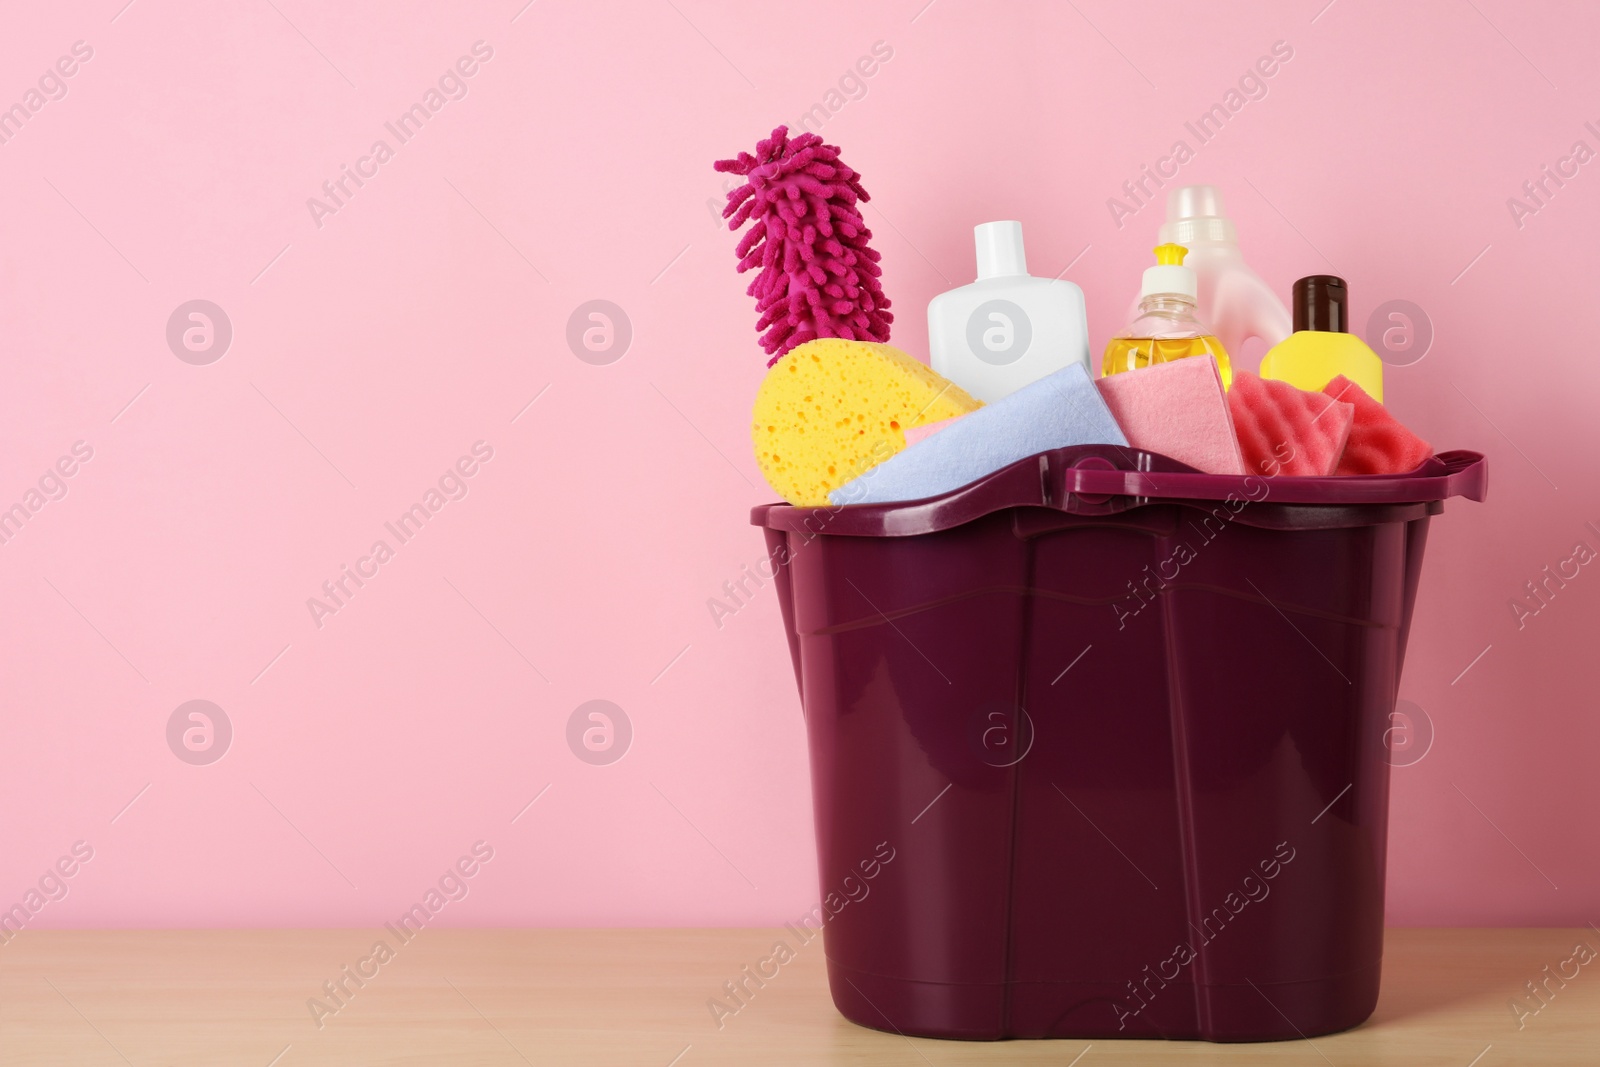 Photo of Bucket with different cleaning supplies on wooden floor near pink wall. Space for text